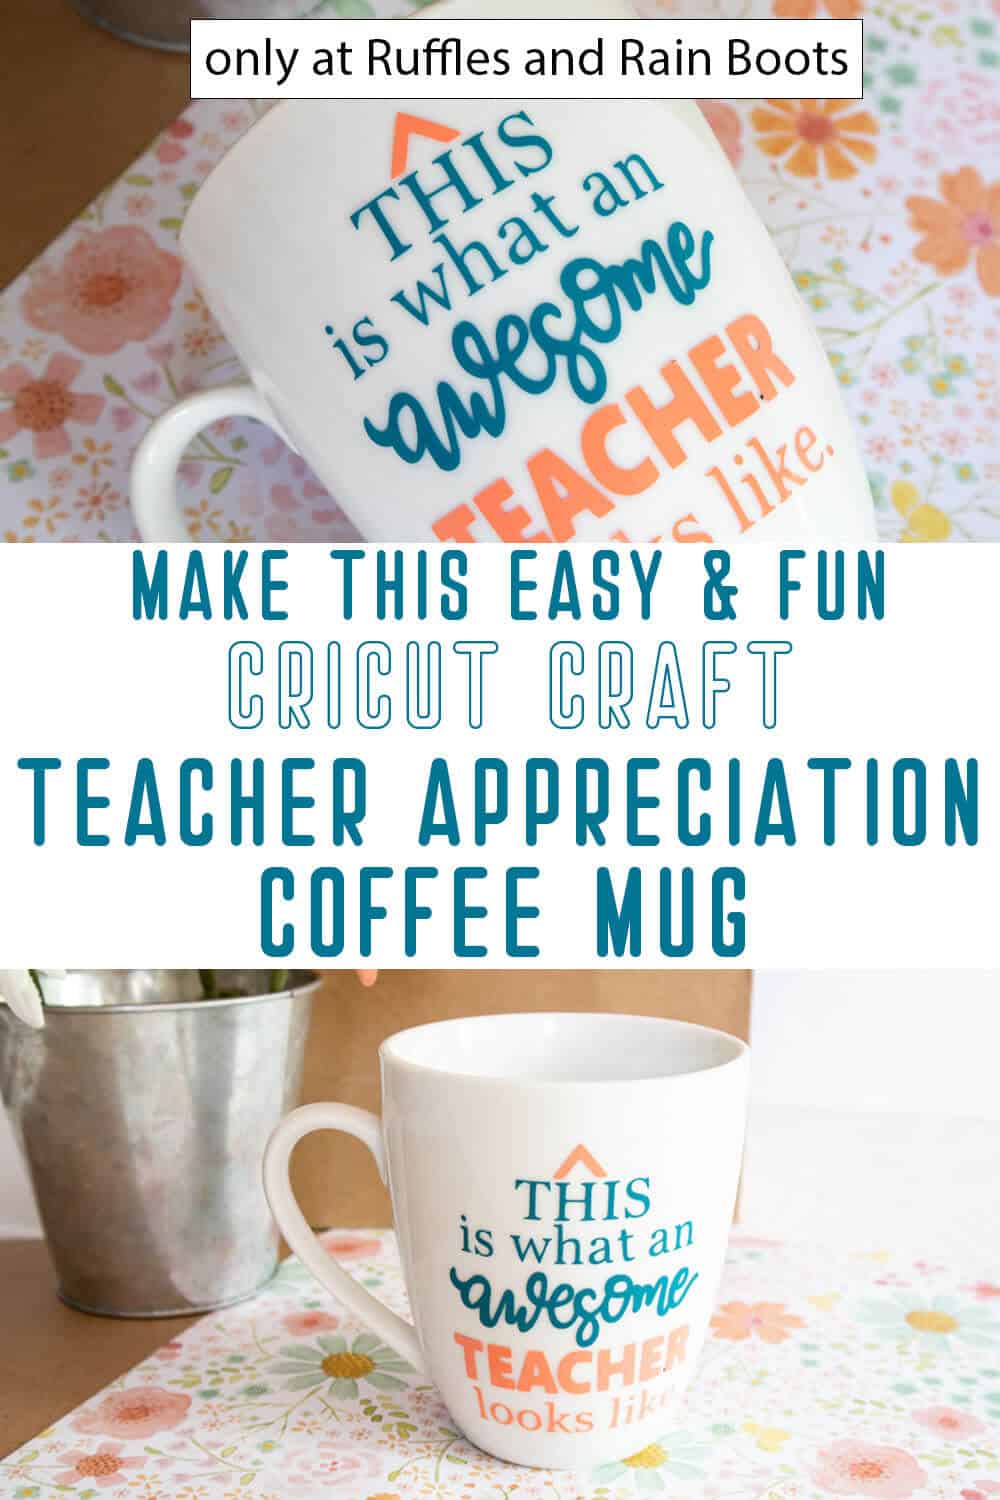 photo collage of teacher appreciation mug cricut craft with text which reads make this easy & fun cricut craft teacher appreciation coffee mug